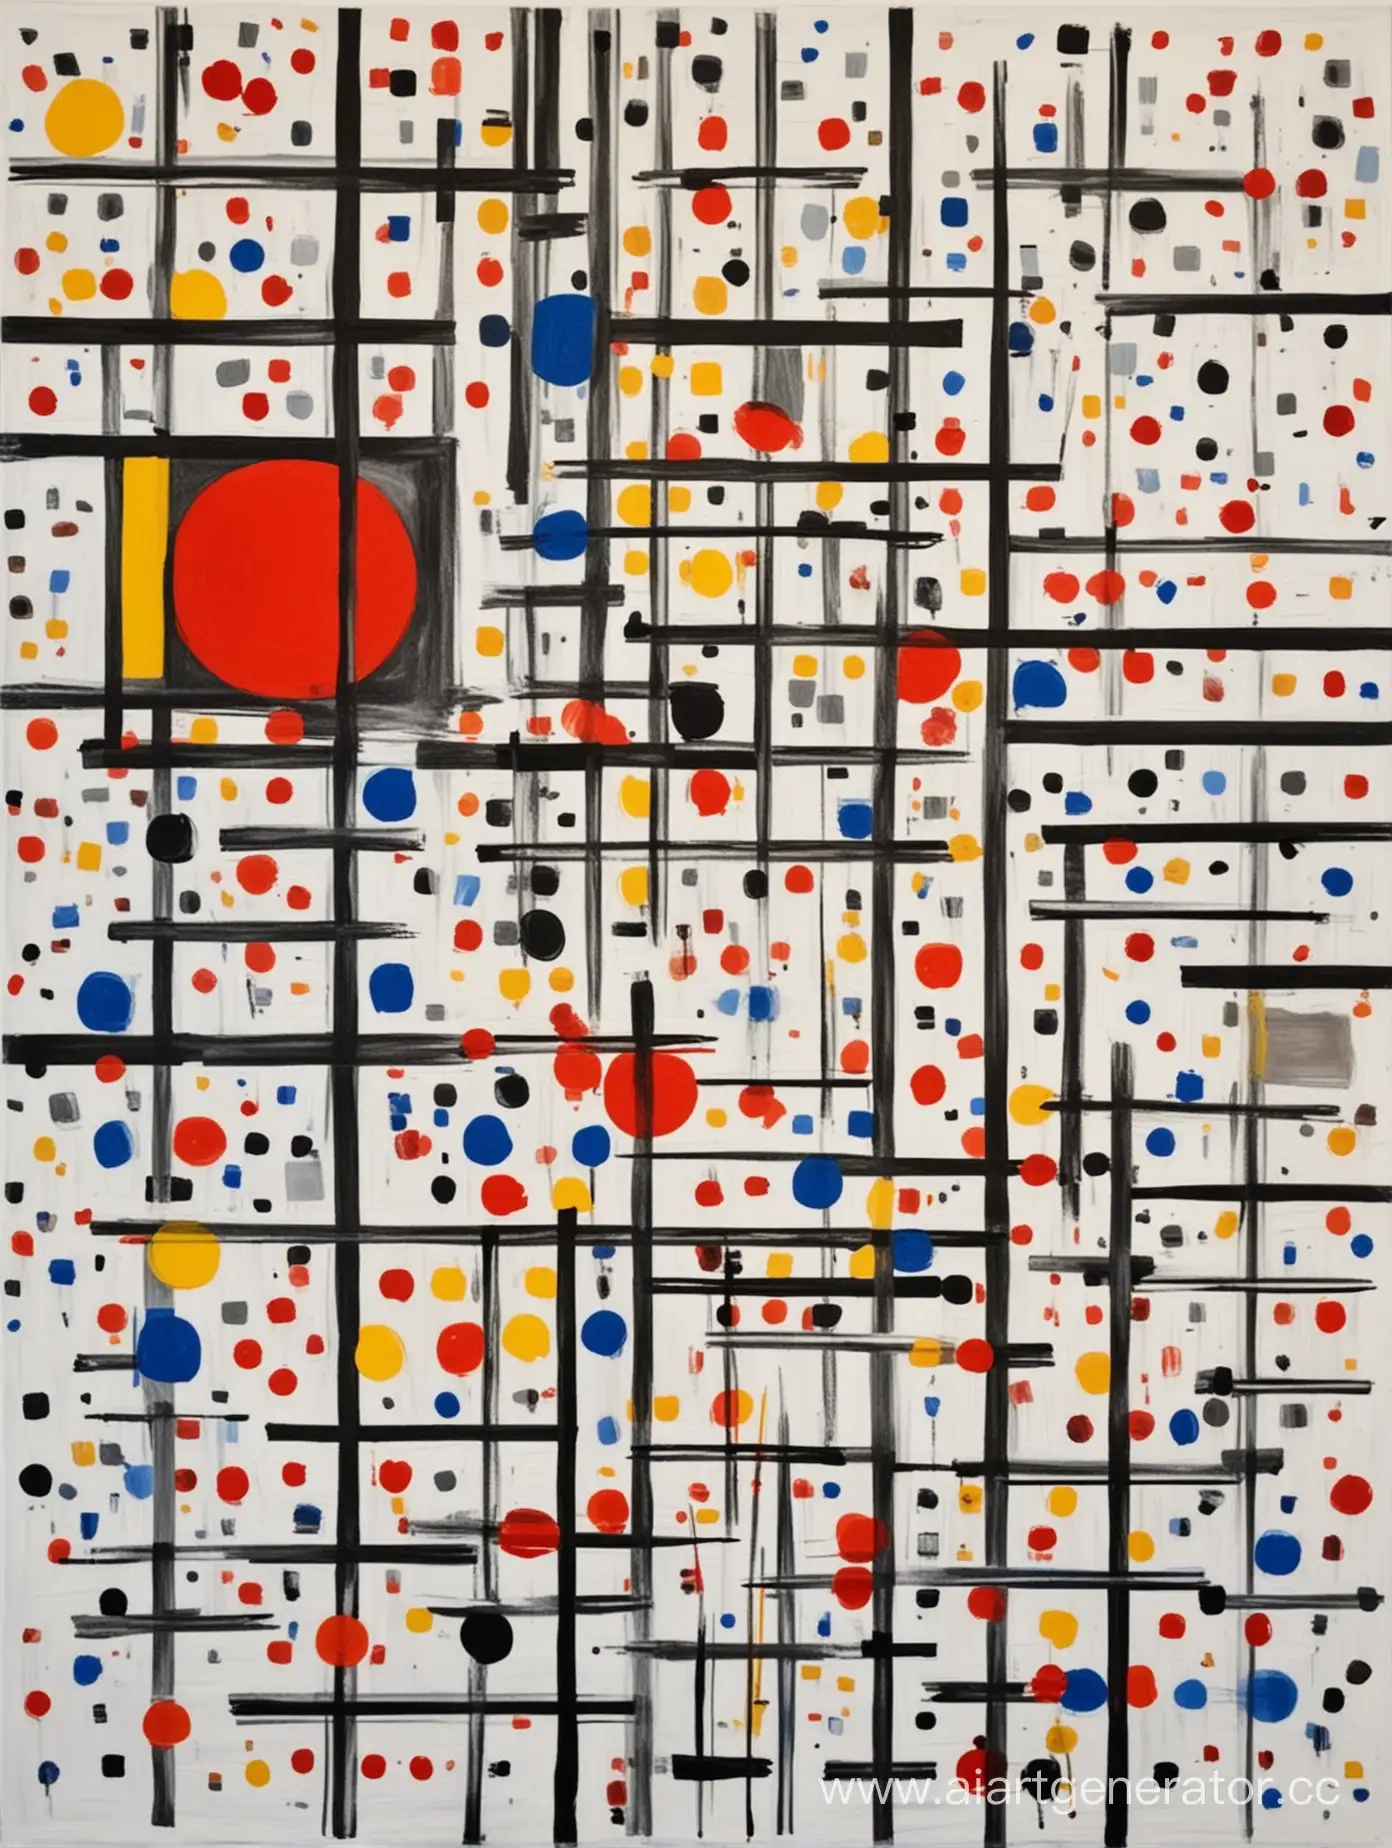 create an abstract painting based on the work of artists Piet Mondrian and Yayoi Kusama.